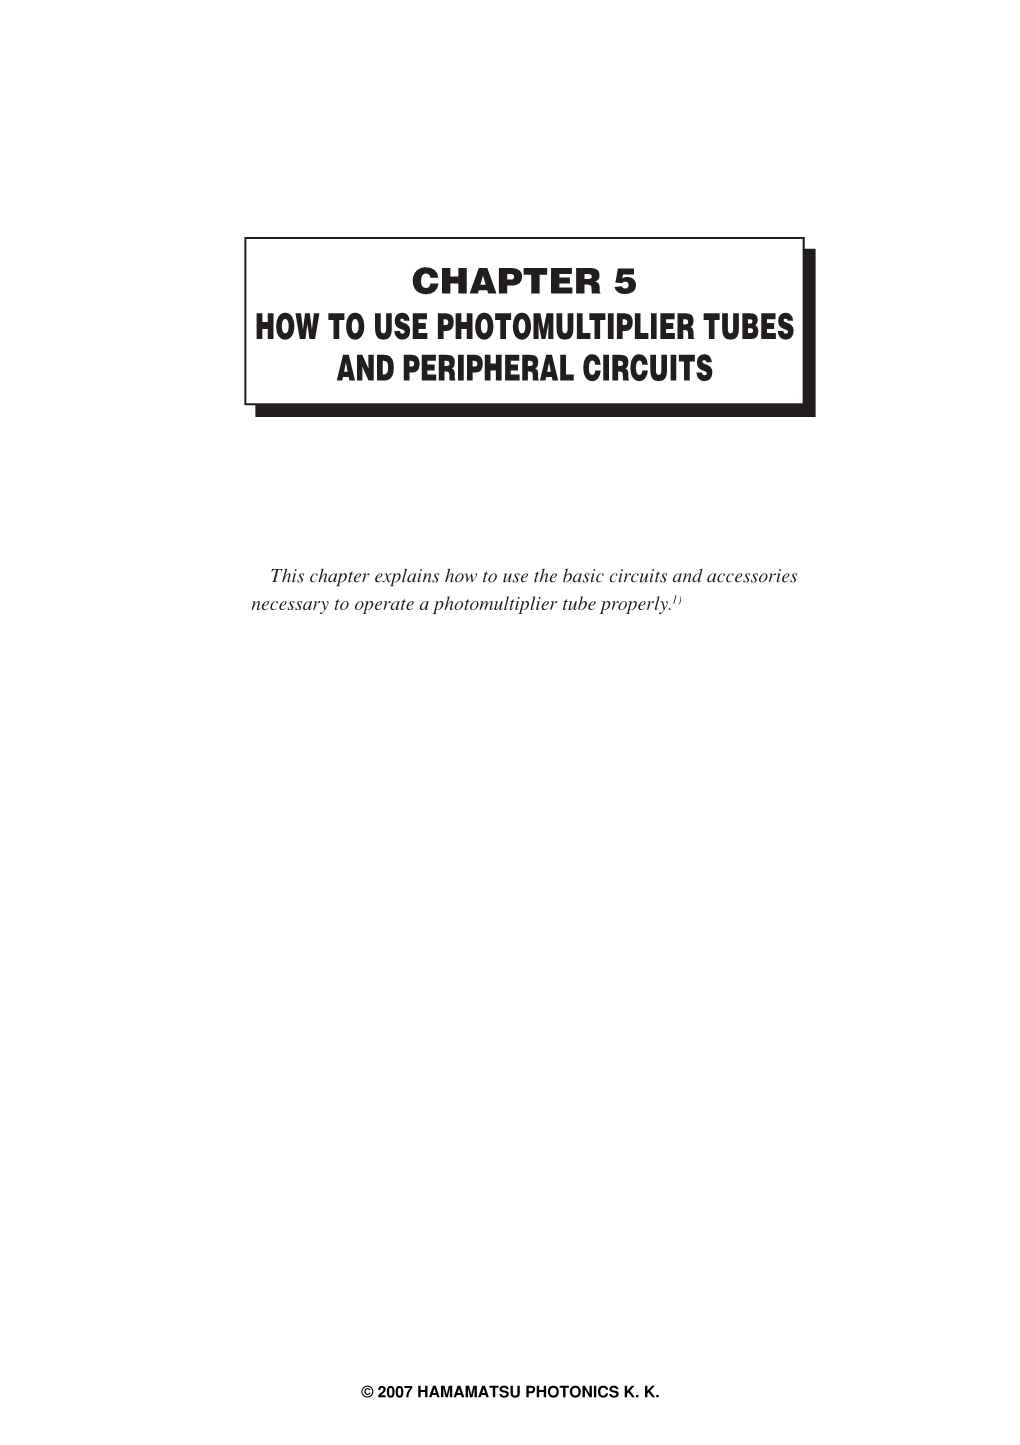 Chapter 5 How to Use Photomultiplier Tubes and Peripheral Circuits